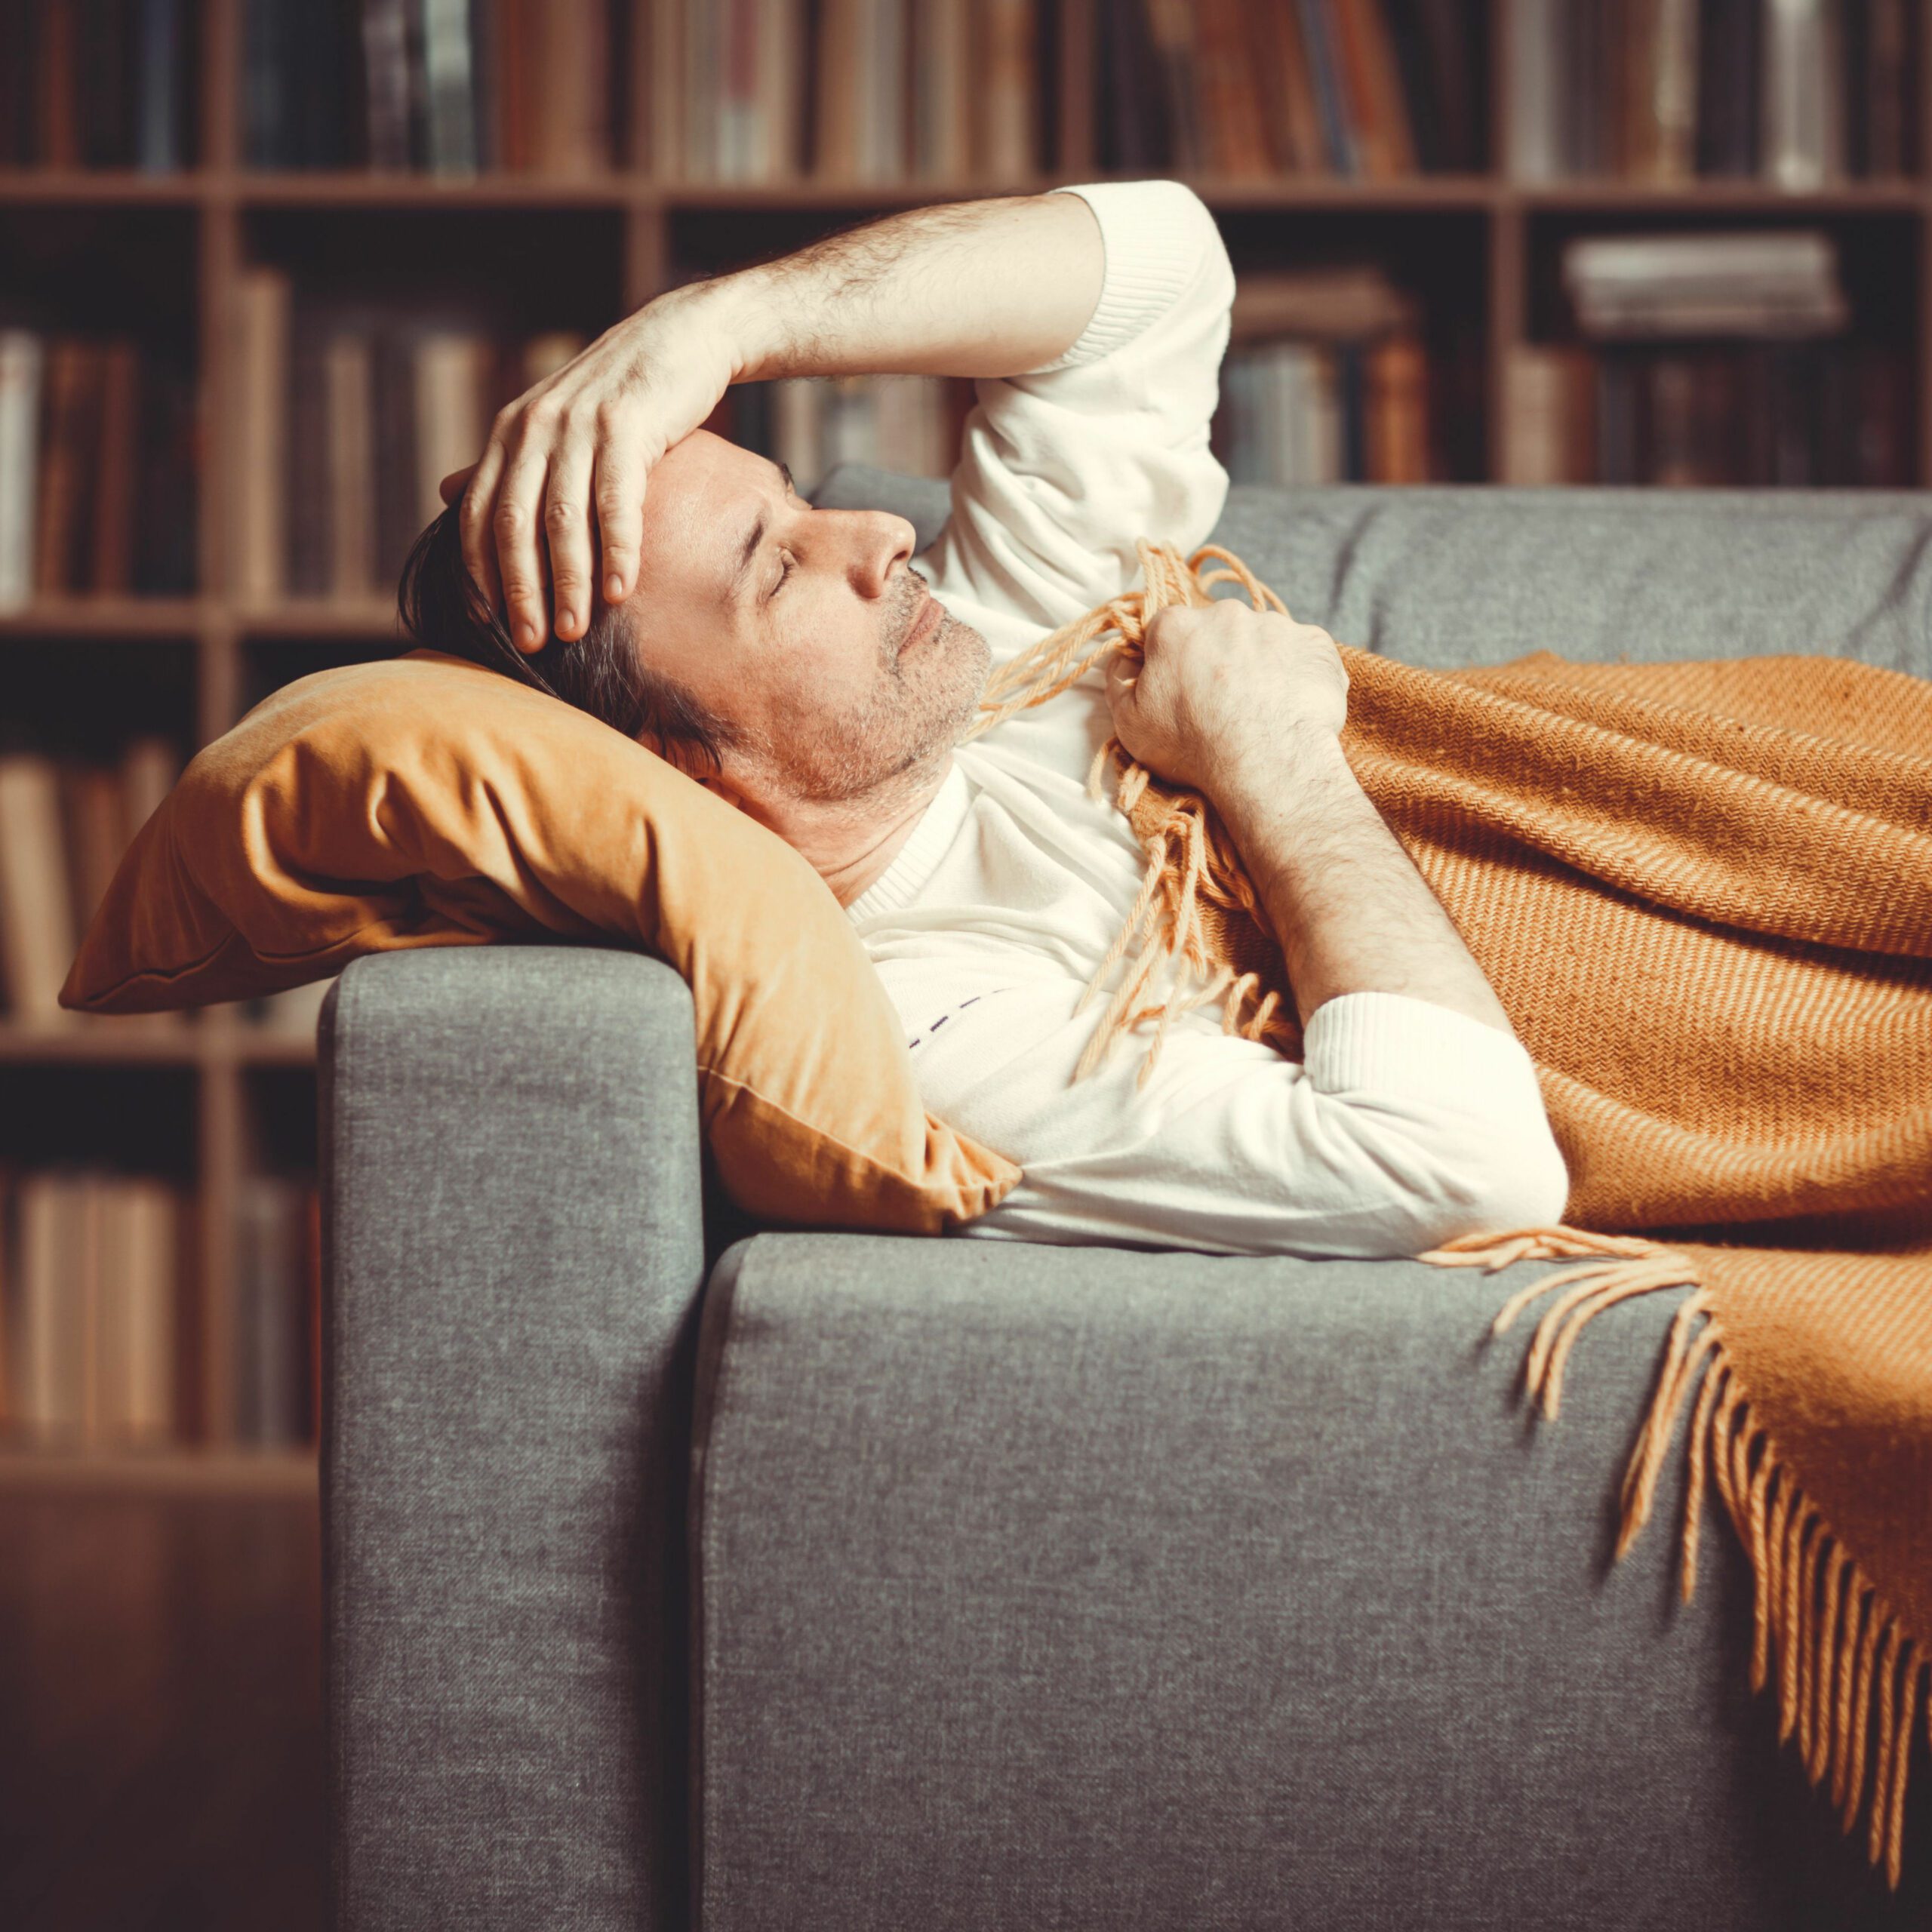 Man laying on a sofa feeling unwell and keeping his hand on the forehead